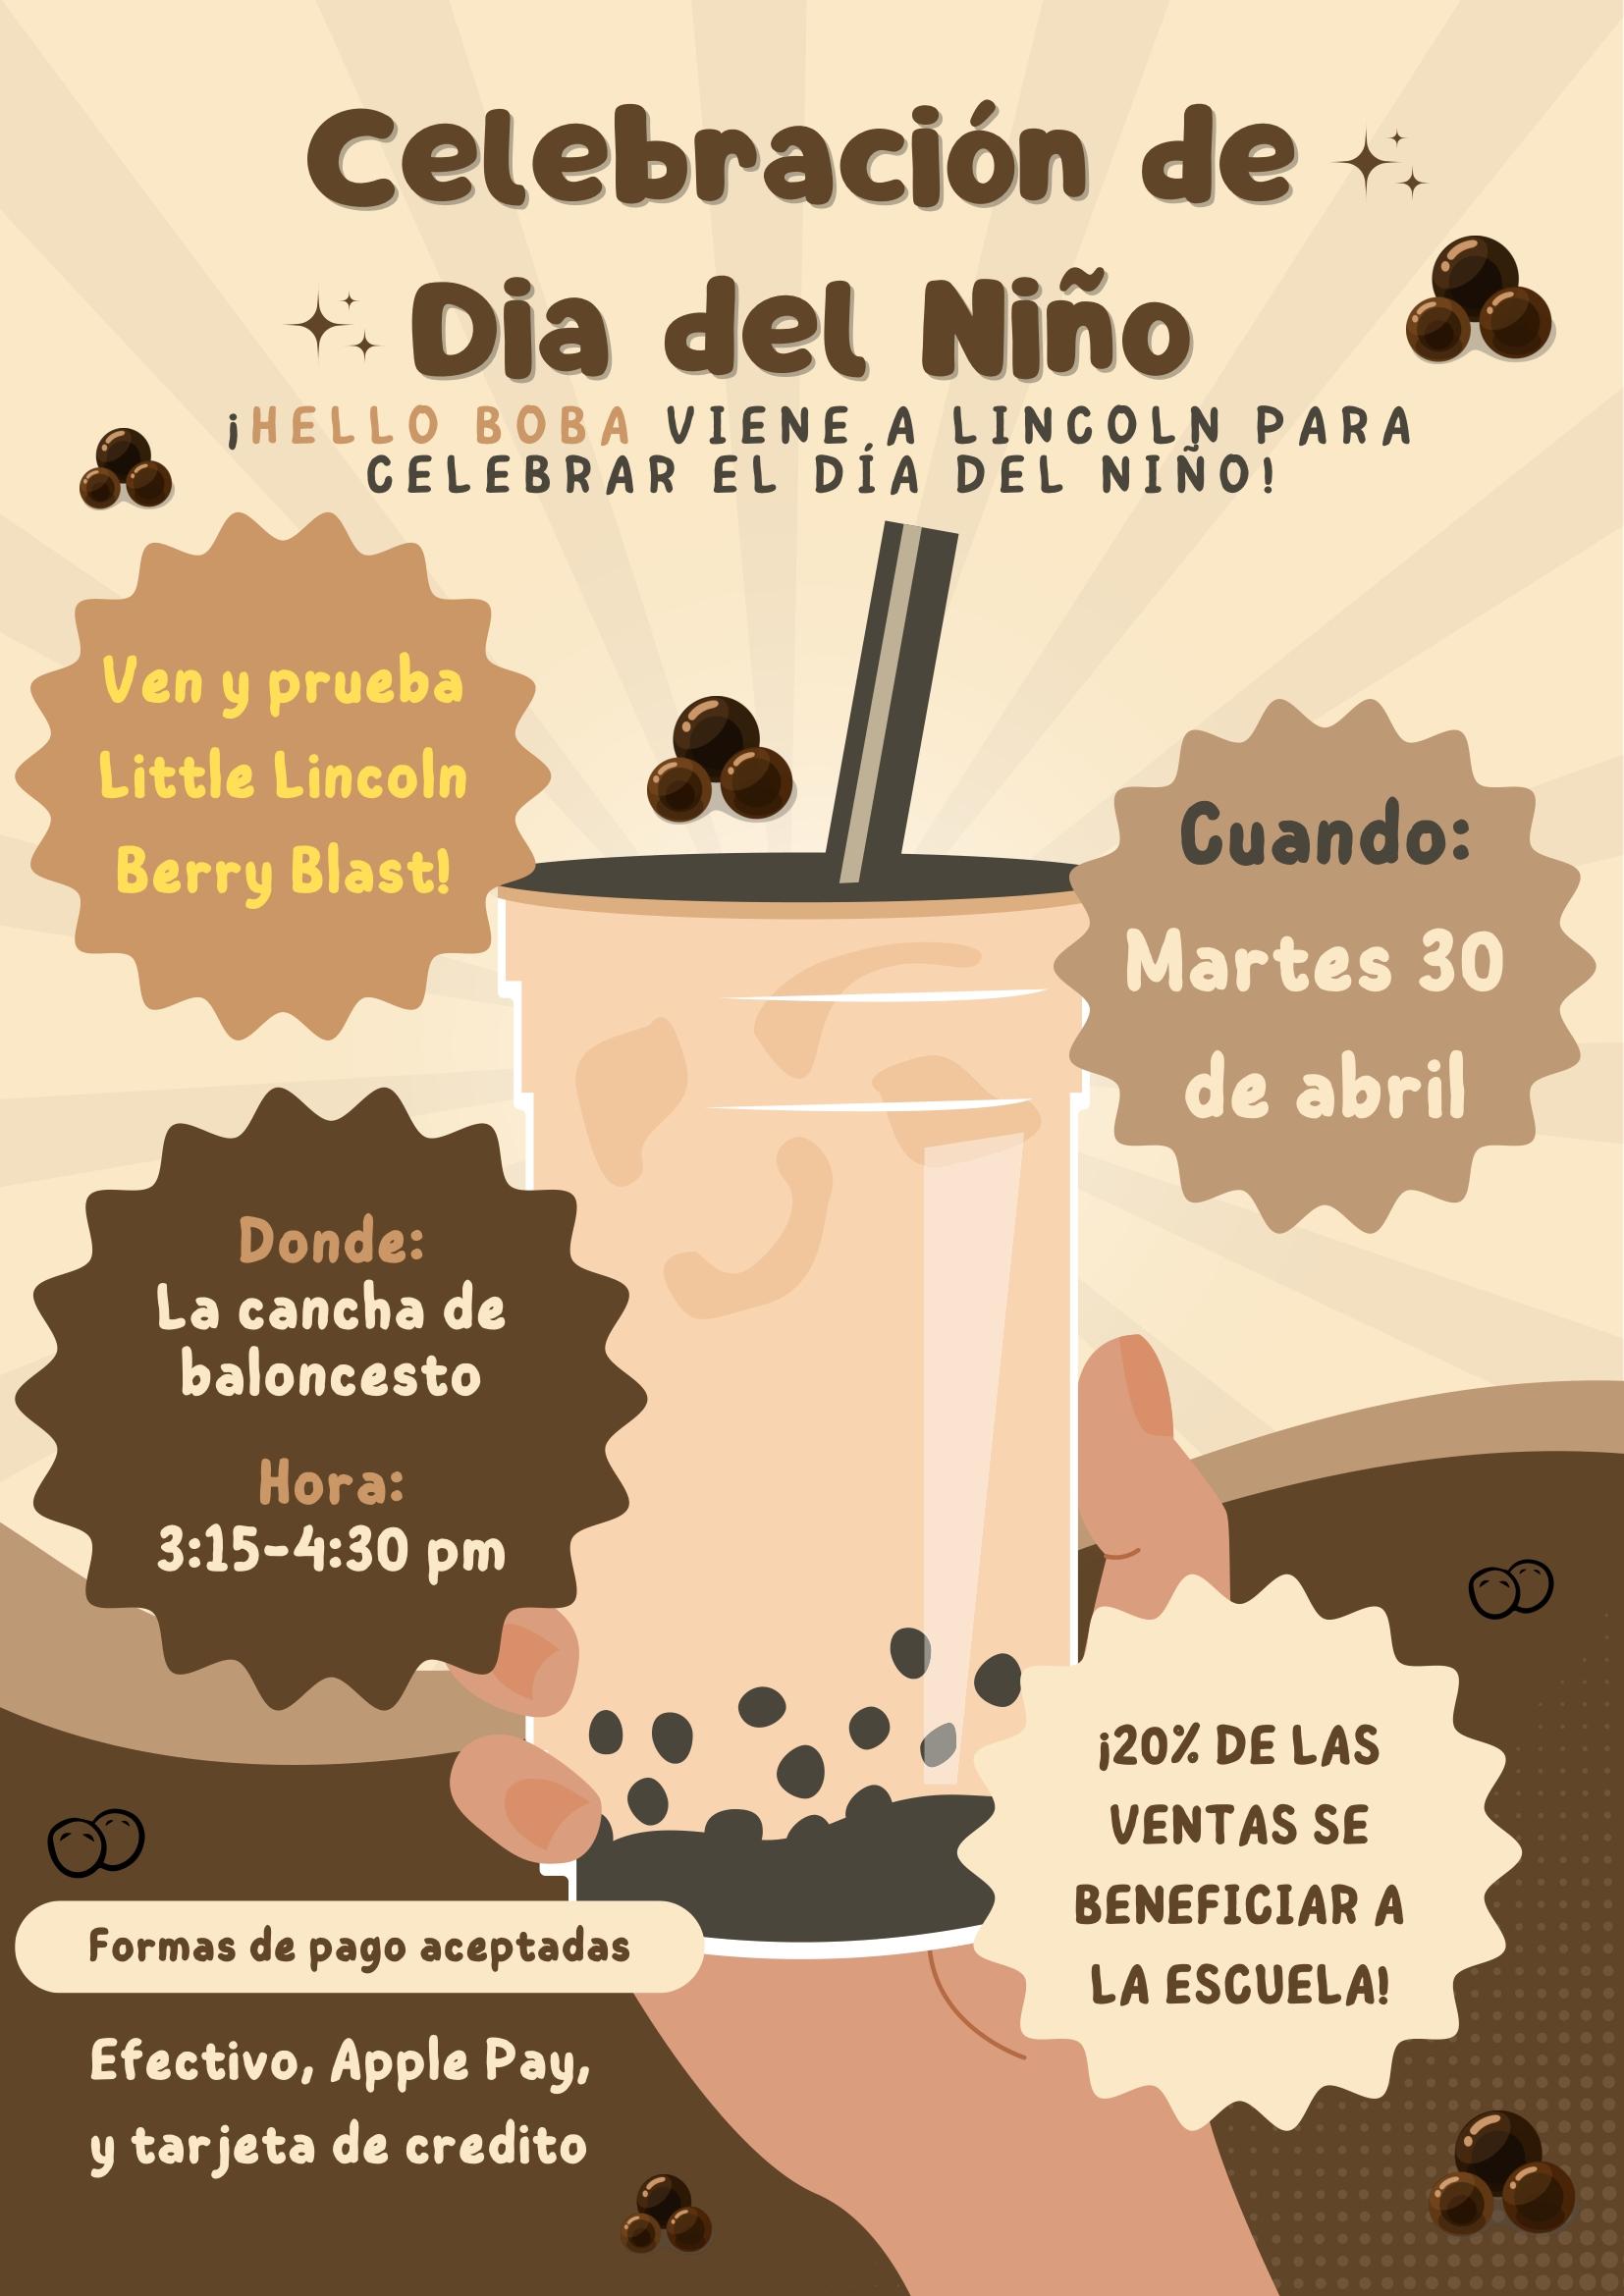 Spanish version of the flyer